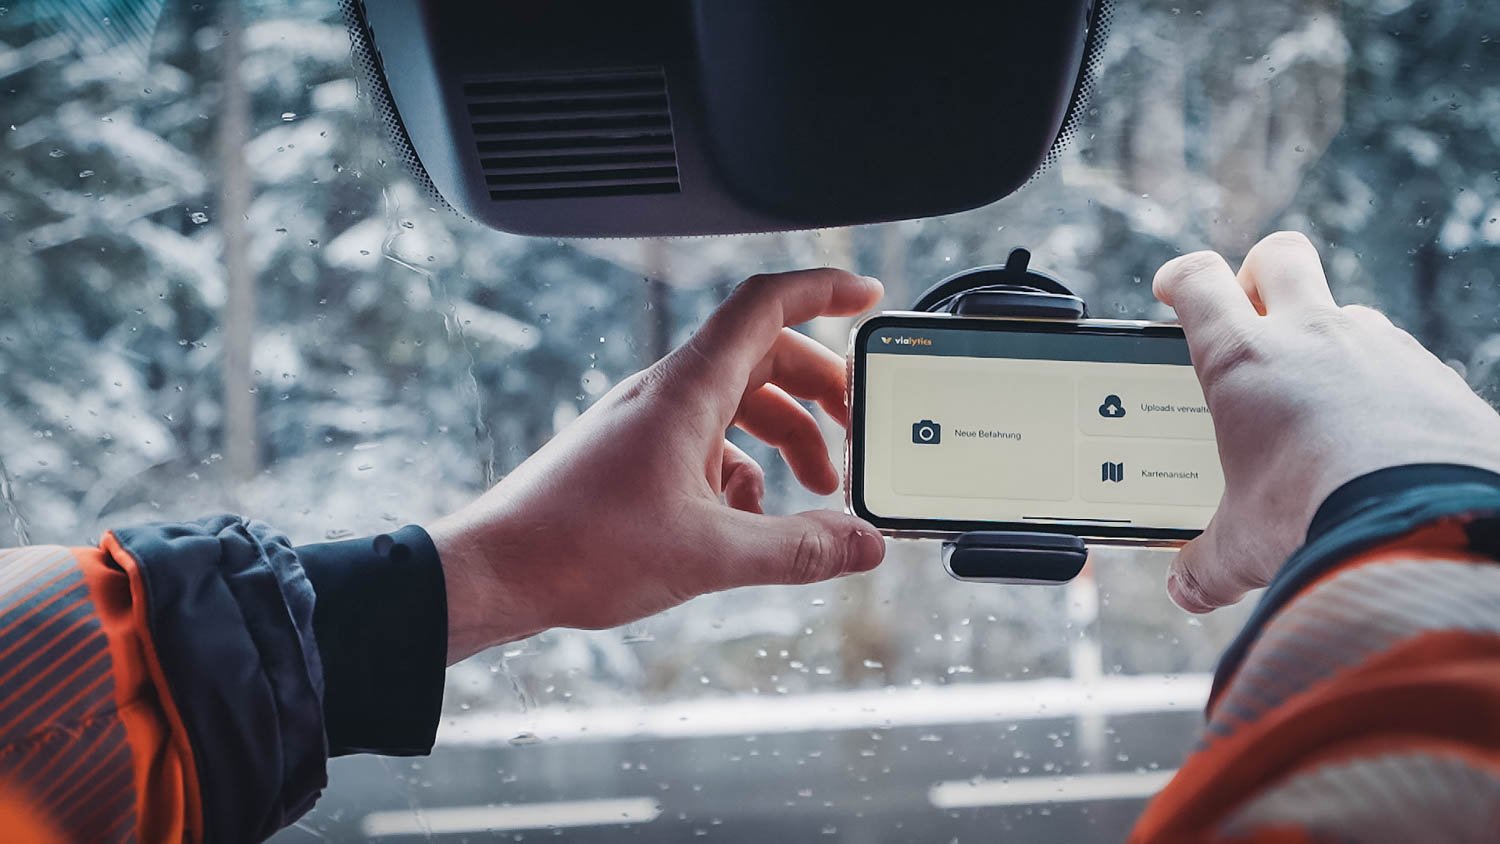 A person from road construction puts a cell phone in a holder on a windshield, in the background a snowy forest can be seen 